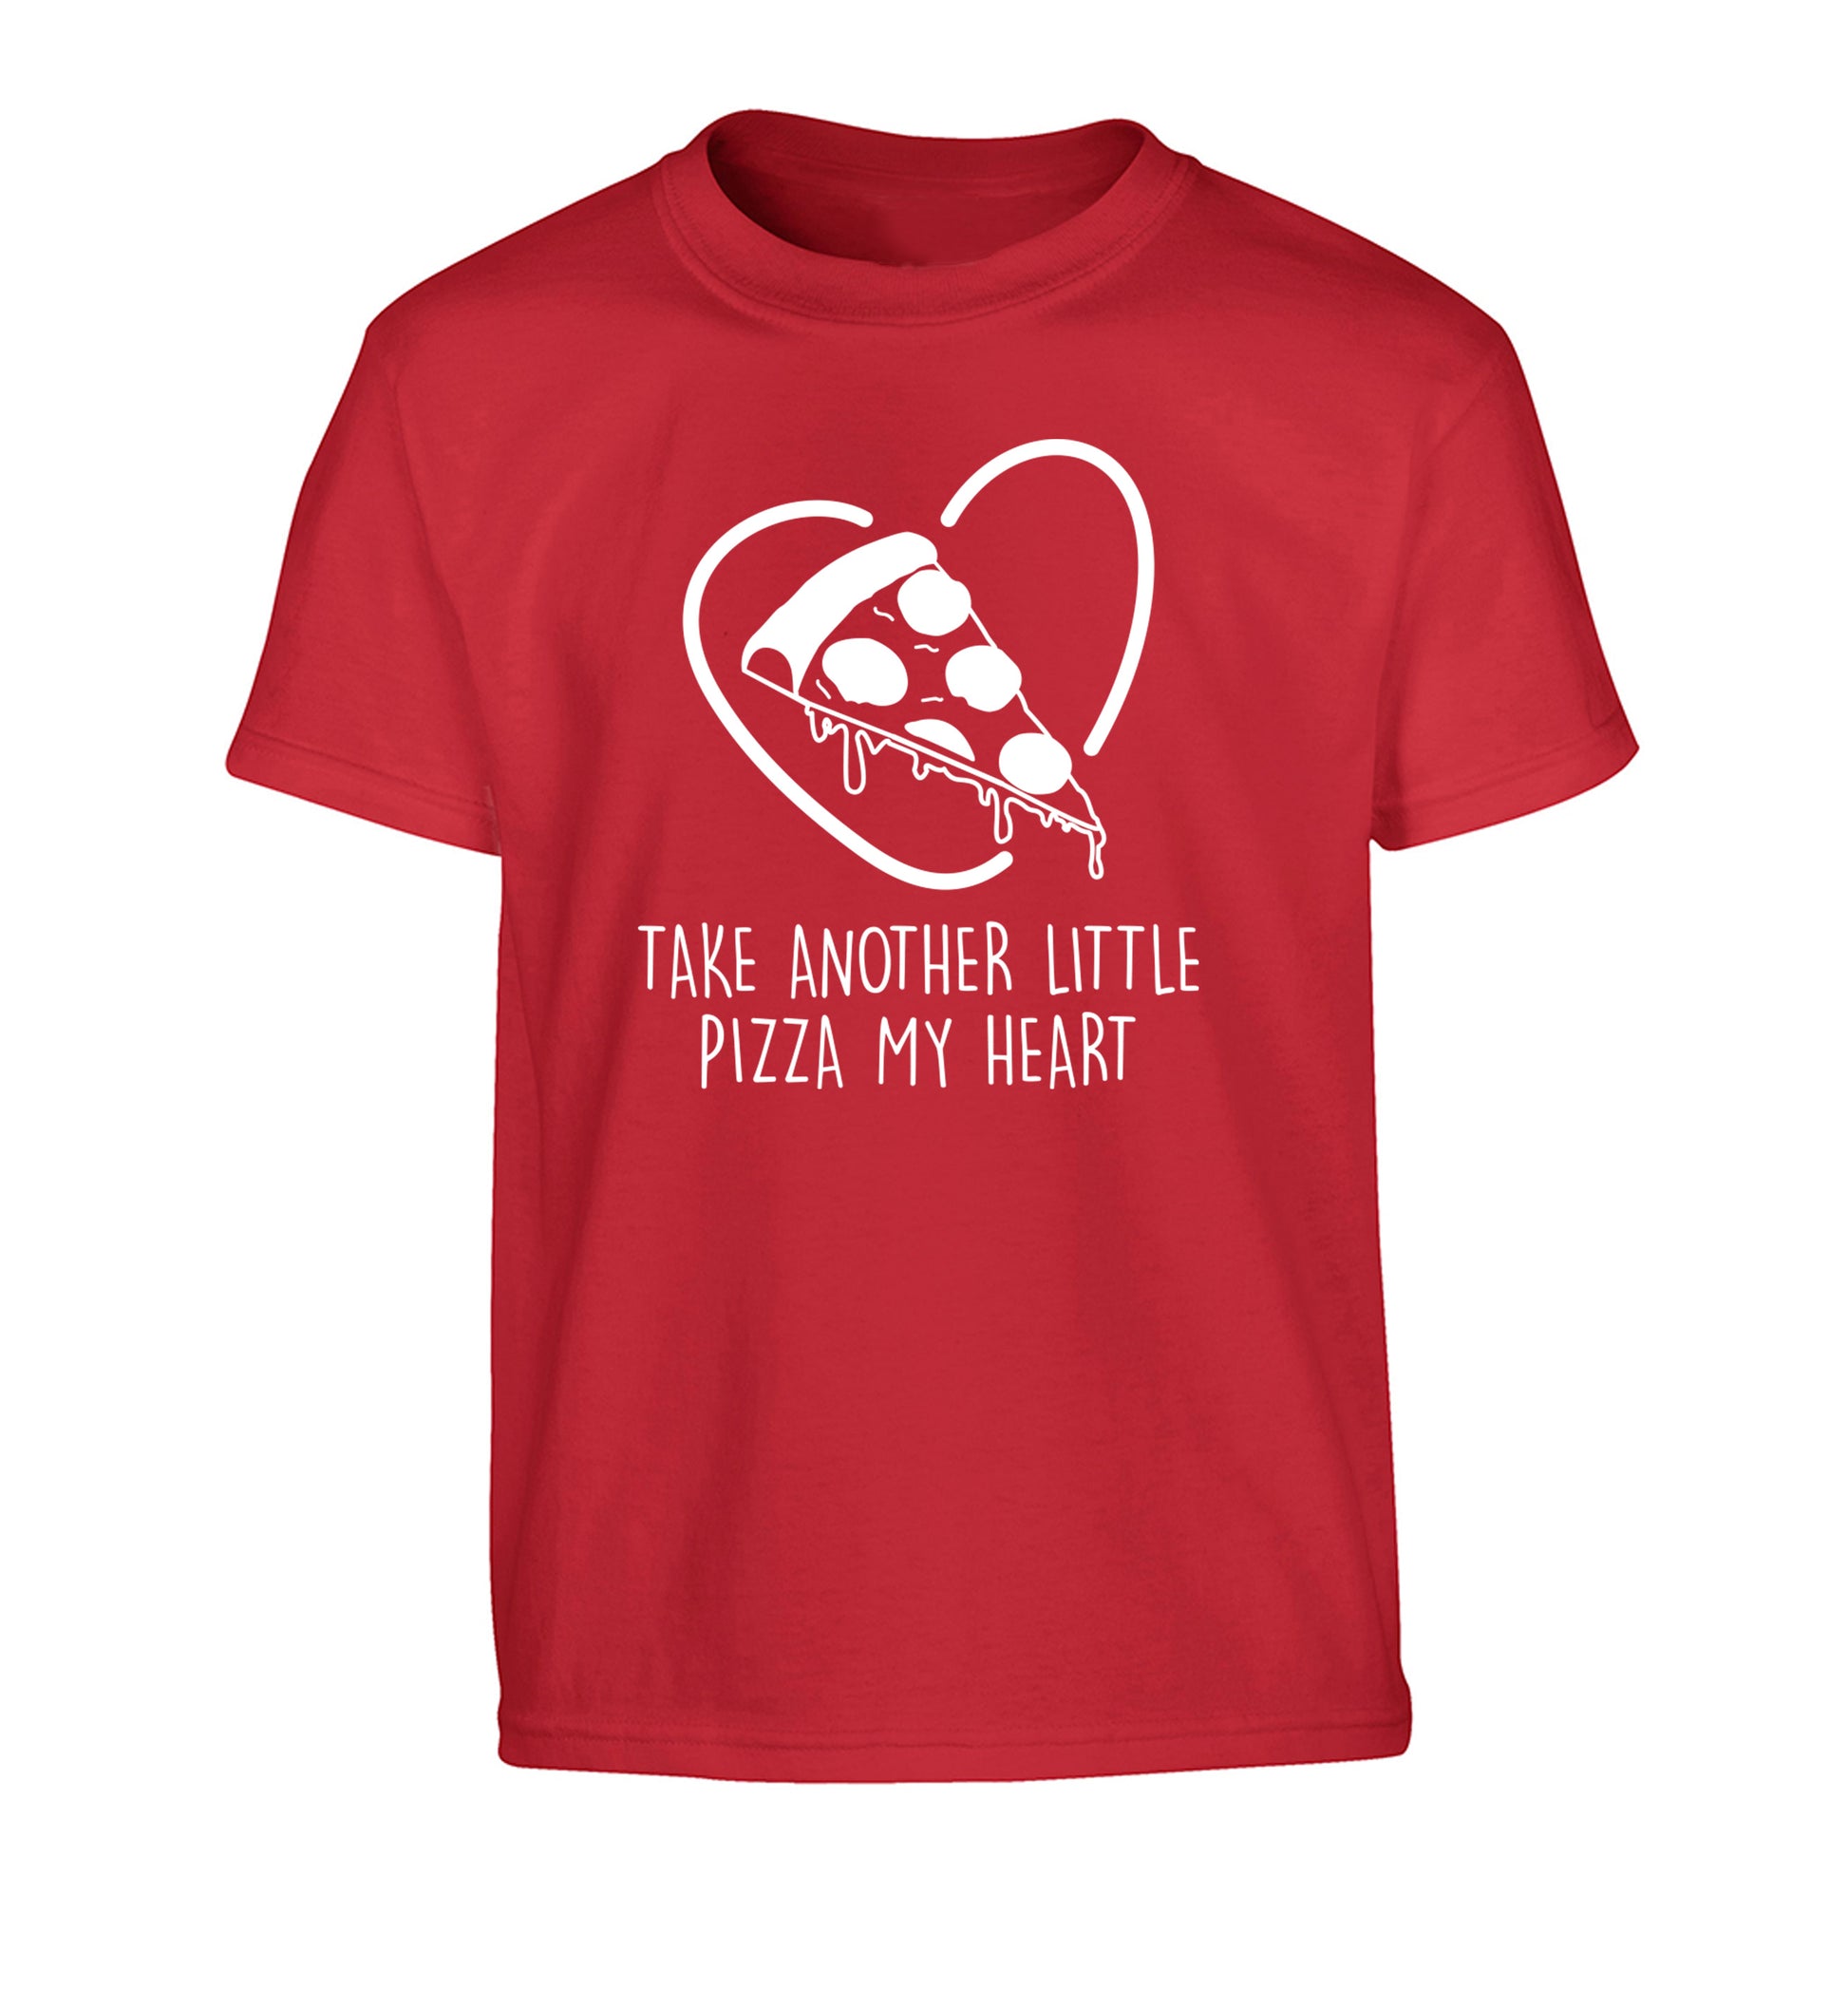 Take another little pizza my heart Children's red Tshirt 12-13 Years